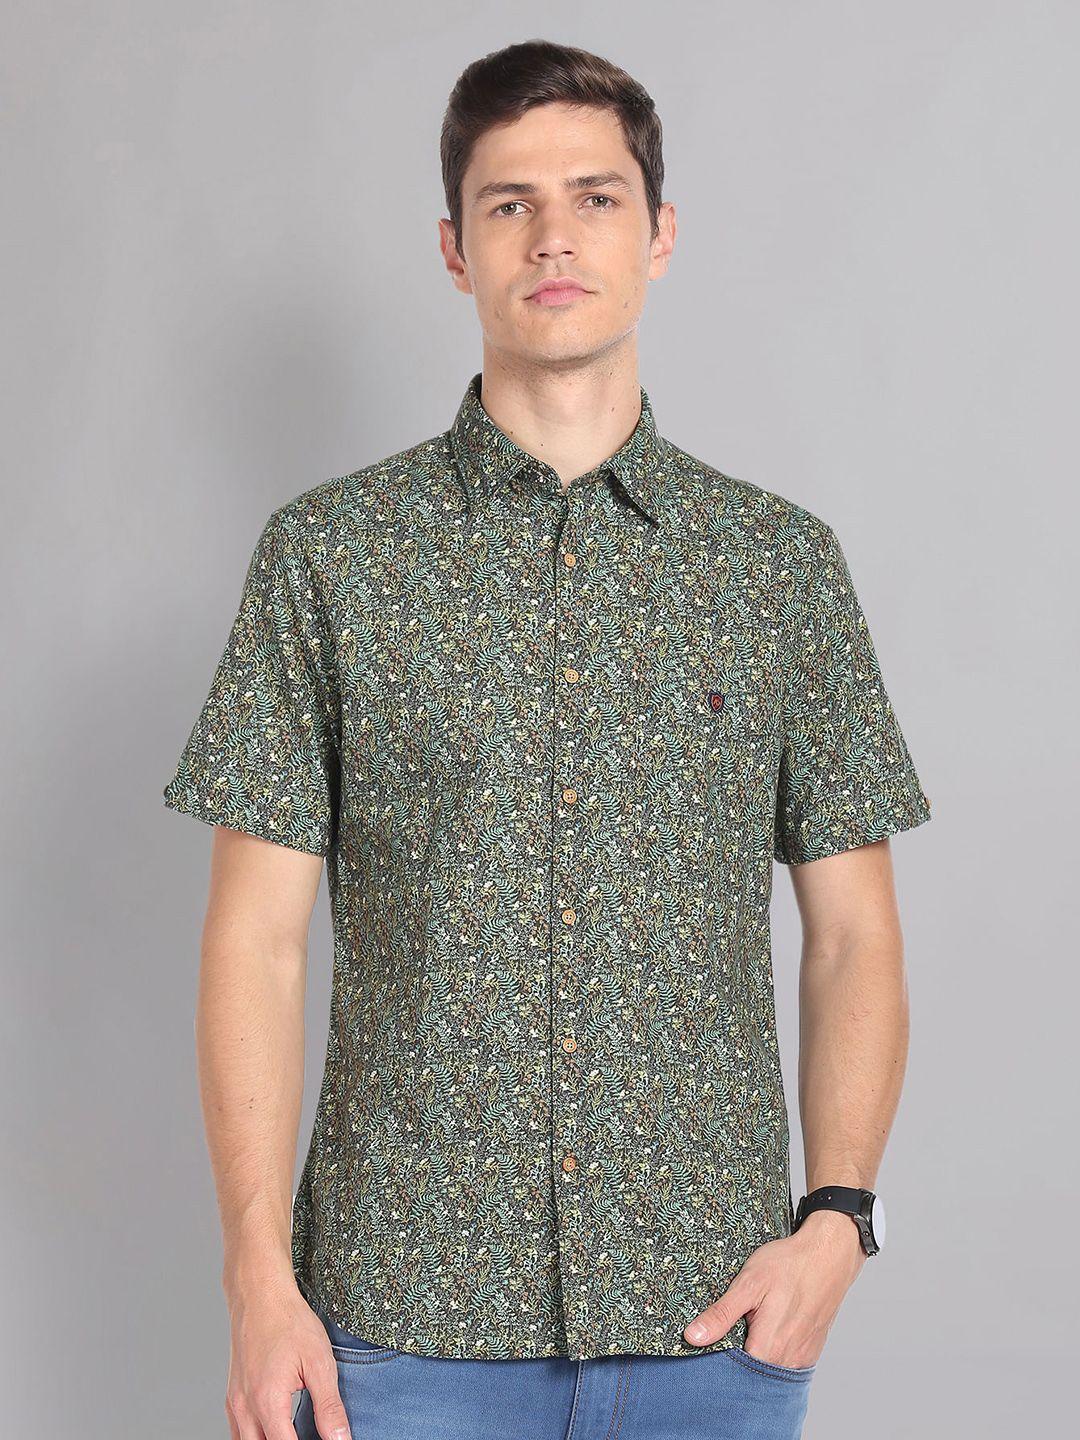 ad by arvind slim fit floral printed spread collar short sleeves cotton casual shirt